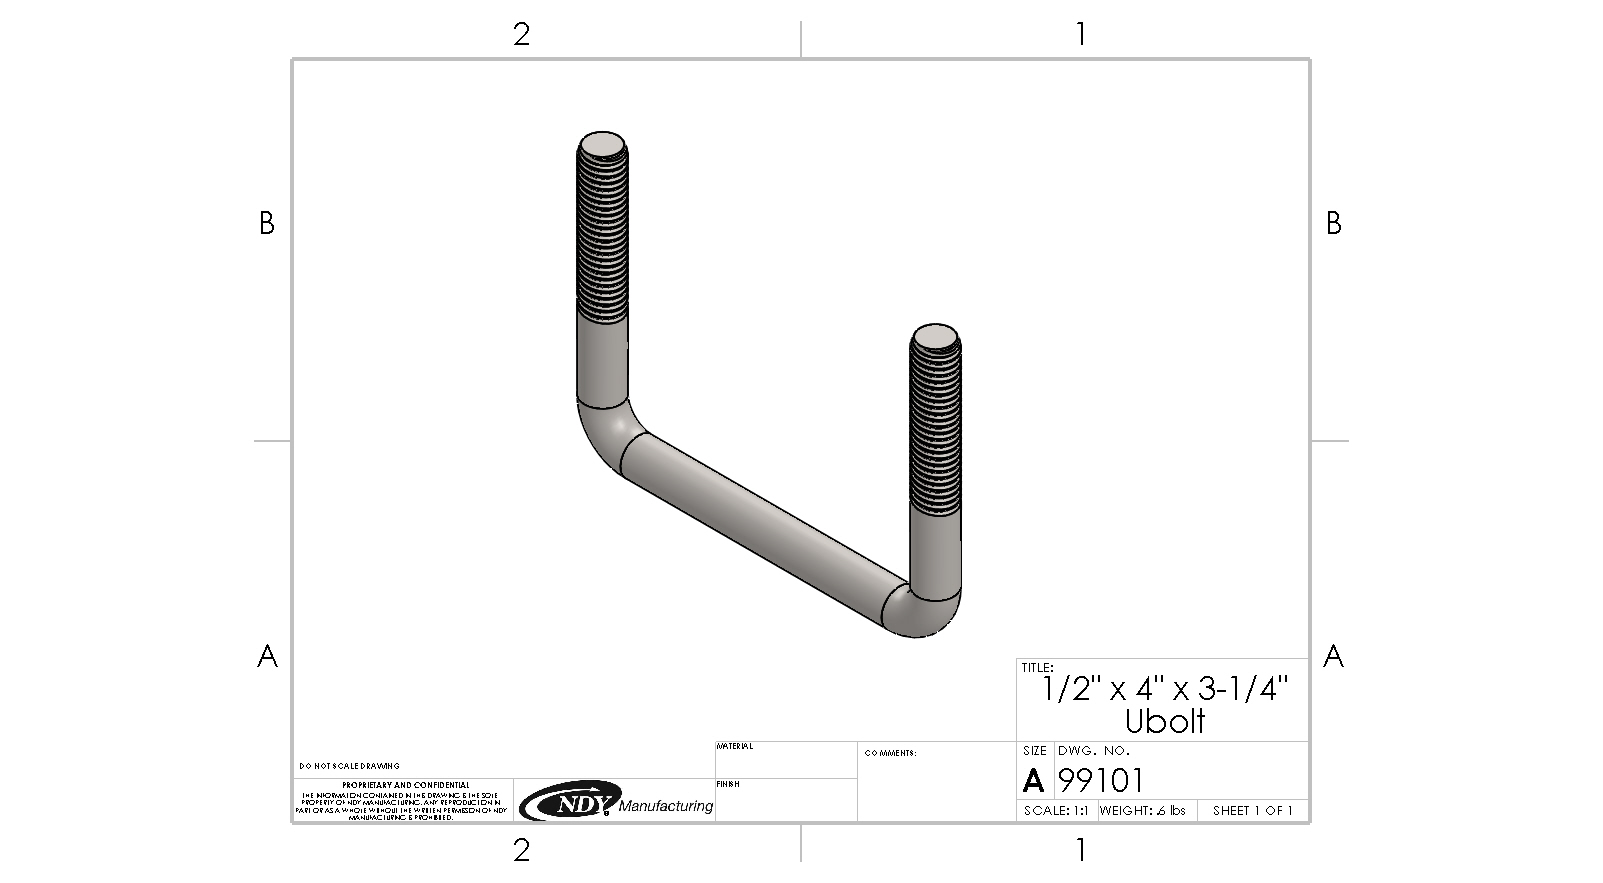 A drawing of a 1/2" x 4" x 3-1/4" Ubolt with a screw on it.